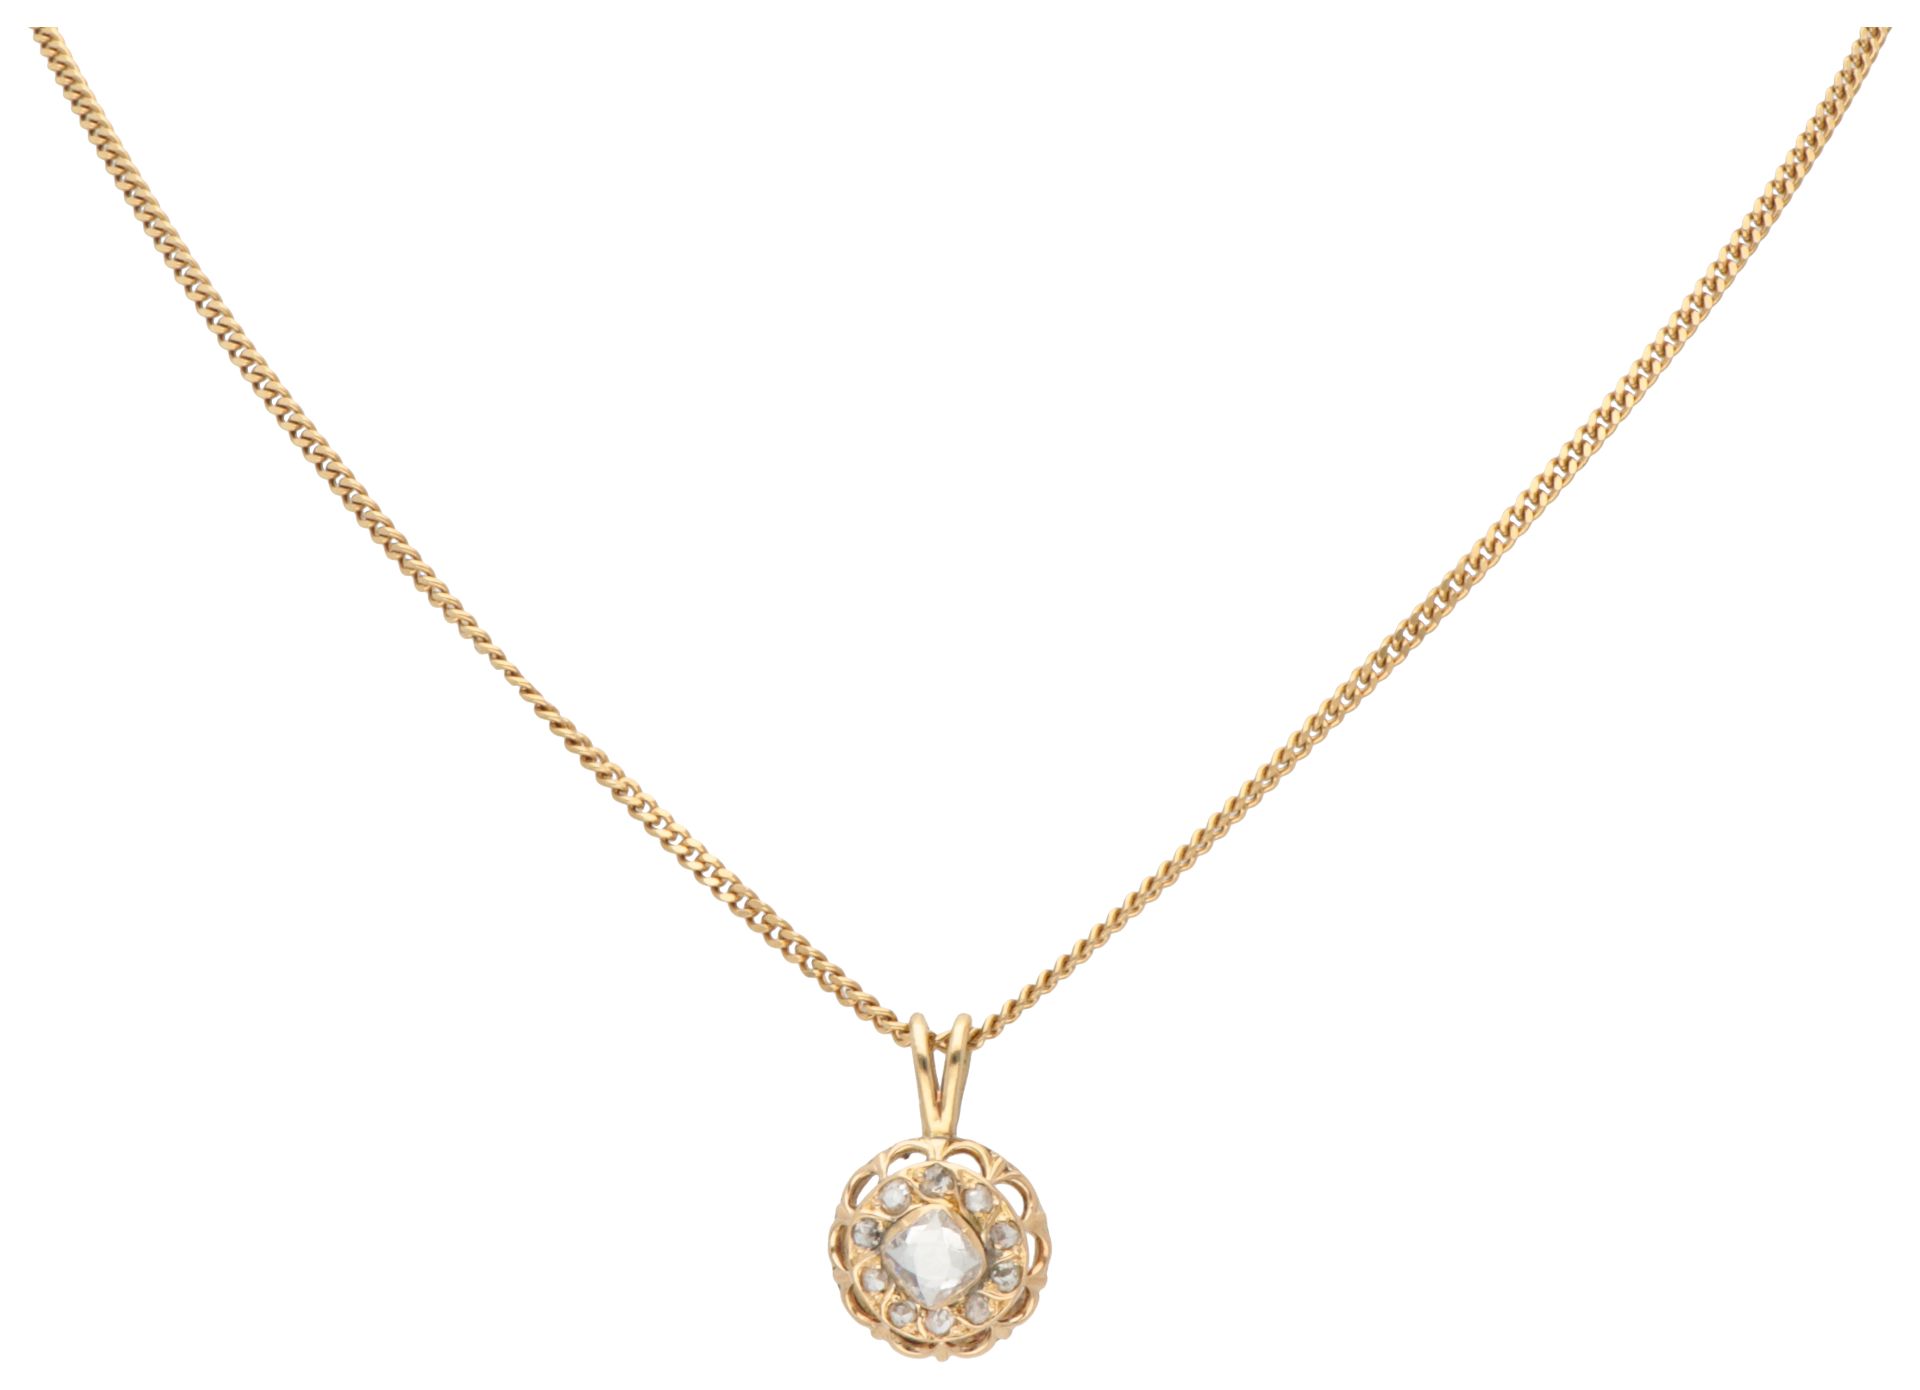 18K Yellow gold pendant with old cut diamonds on necklace.